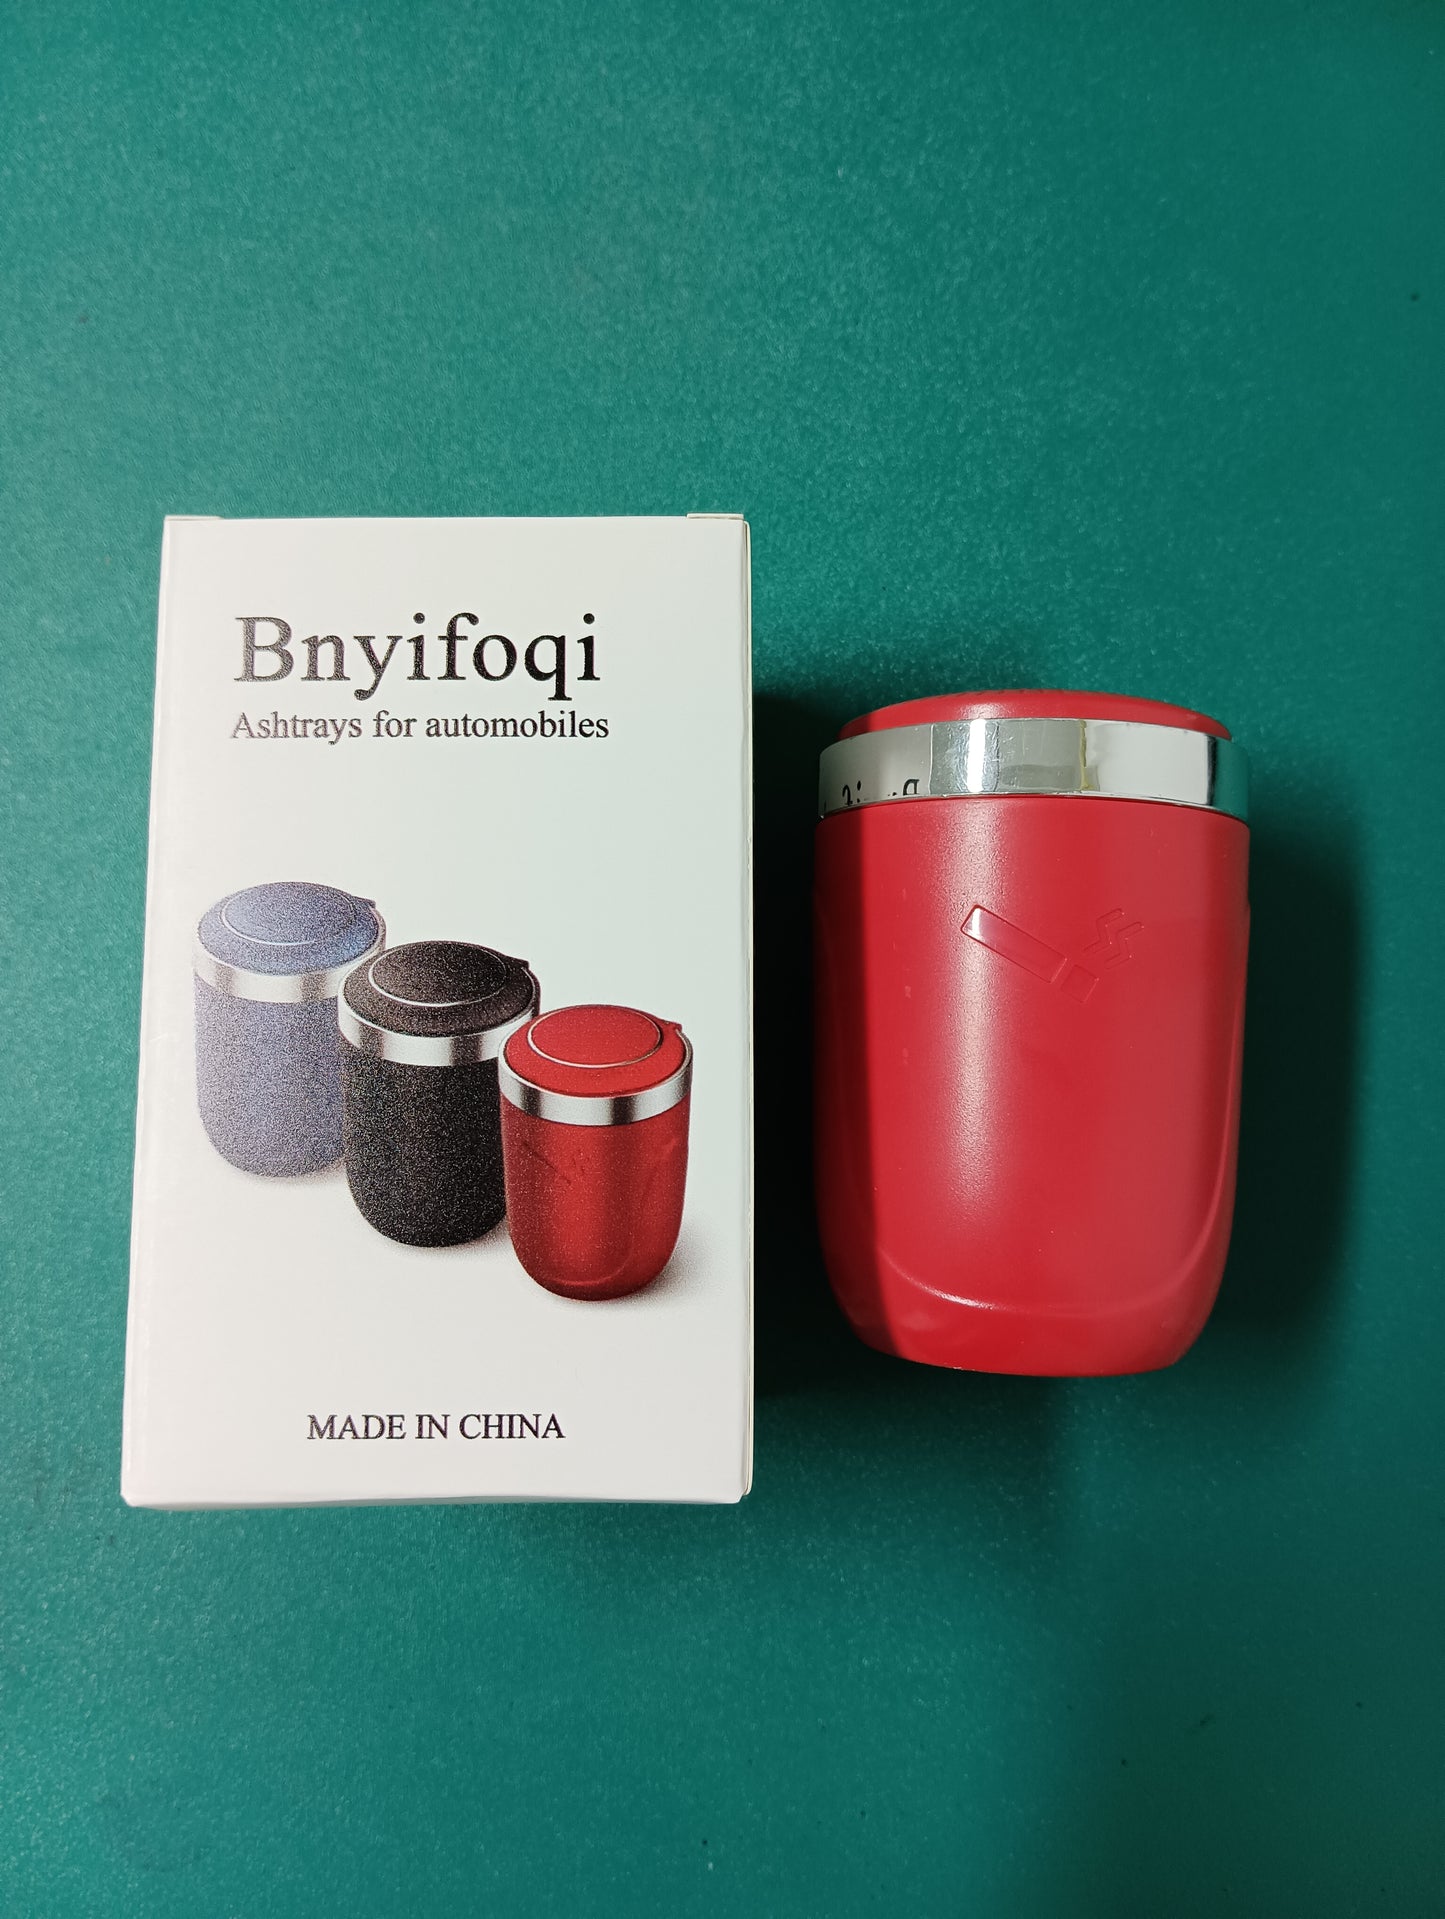 Bnyifoqi Car Ashtray, LED Lighted Lid, ABS Plating Material, Large Capacity, Sealed Design for Smoke-free Airflow Red/Silver